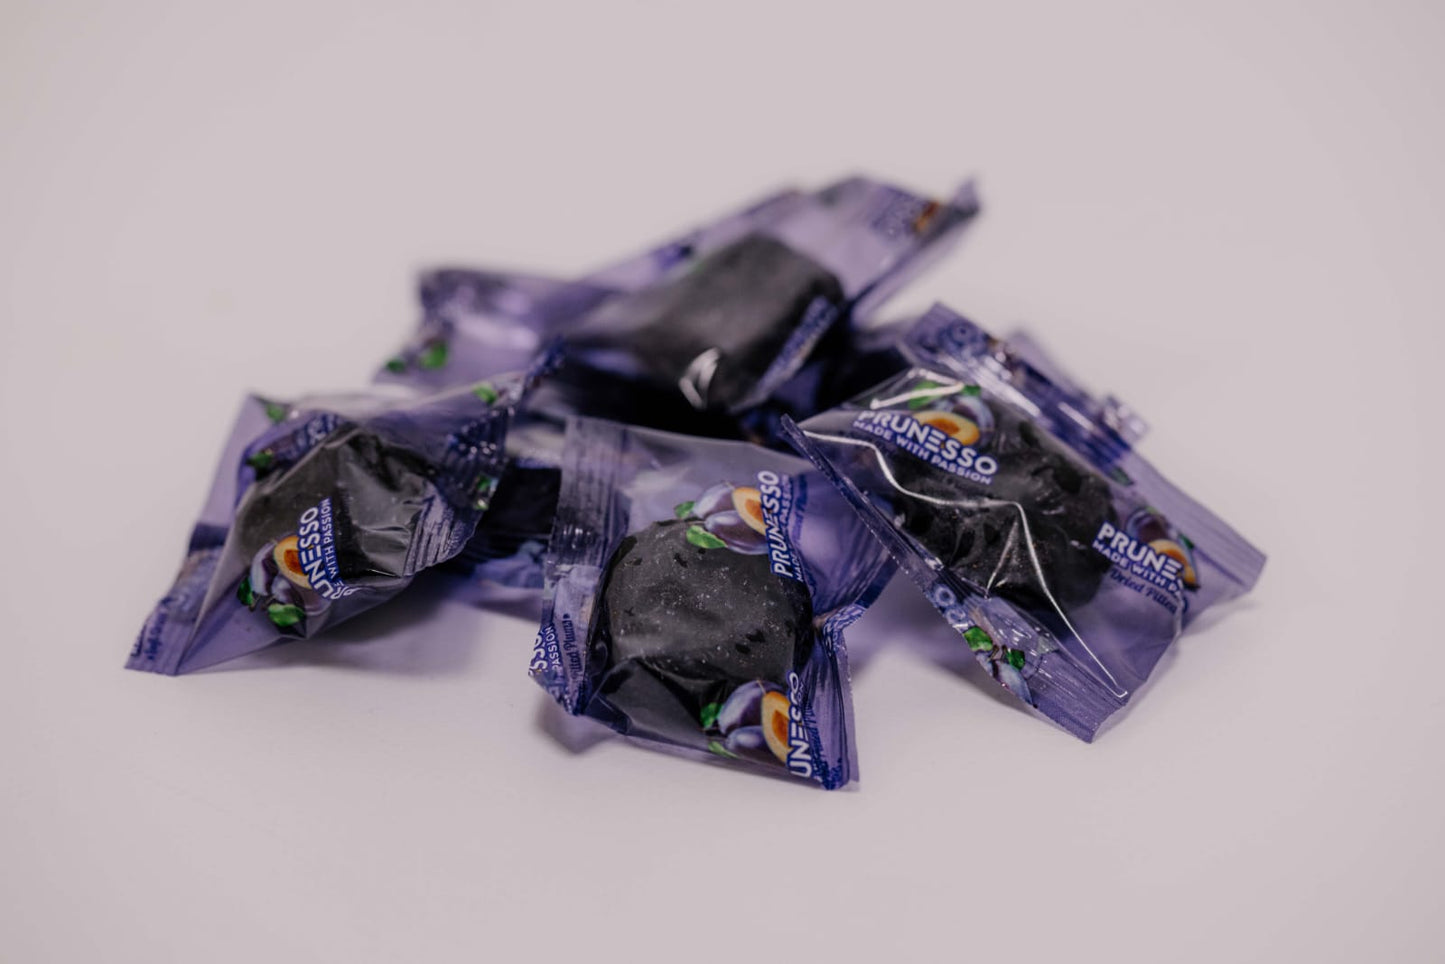 Dried Prunes individual packing 100g